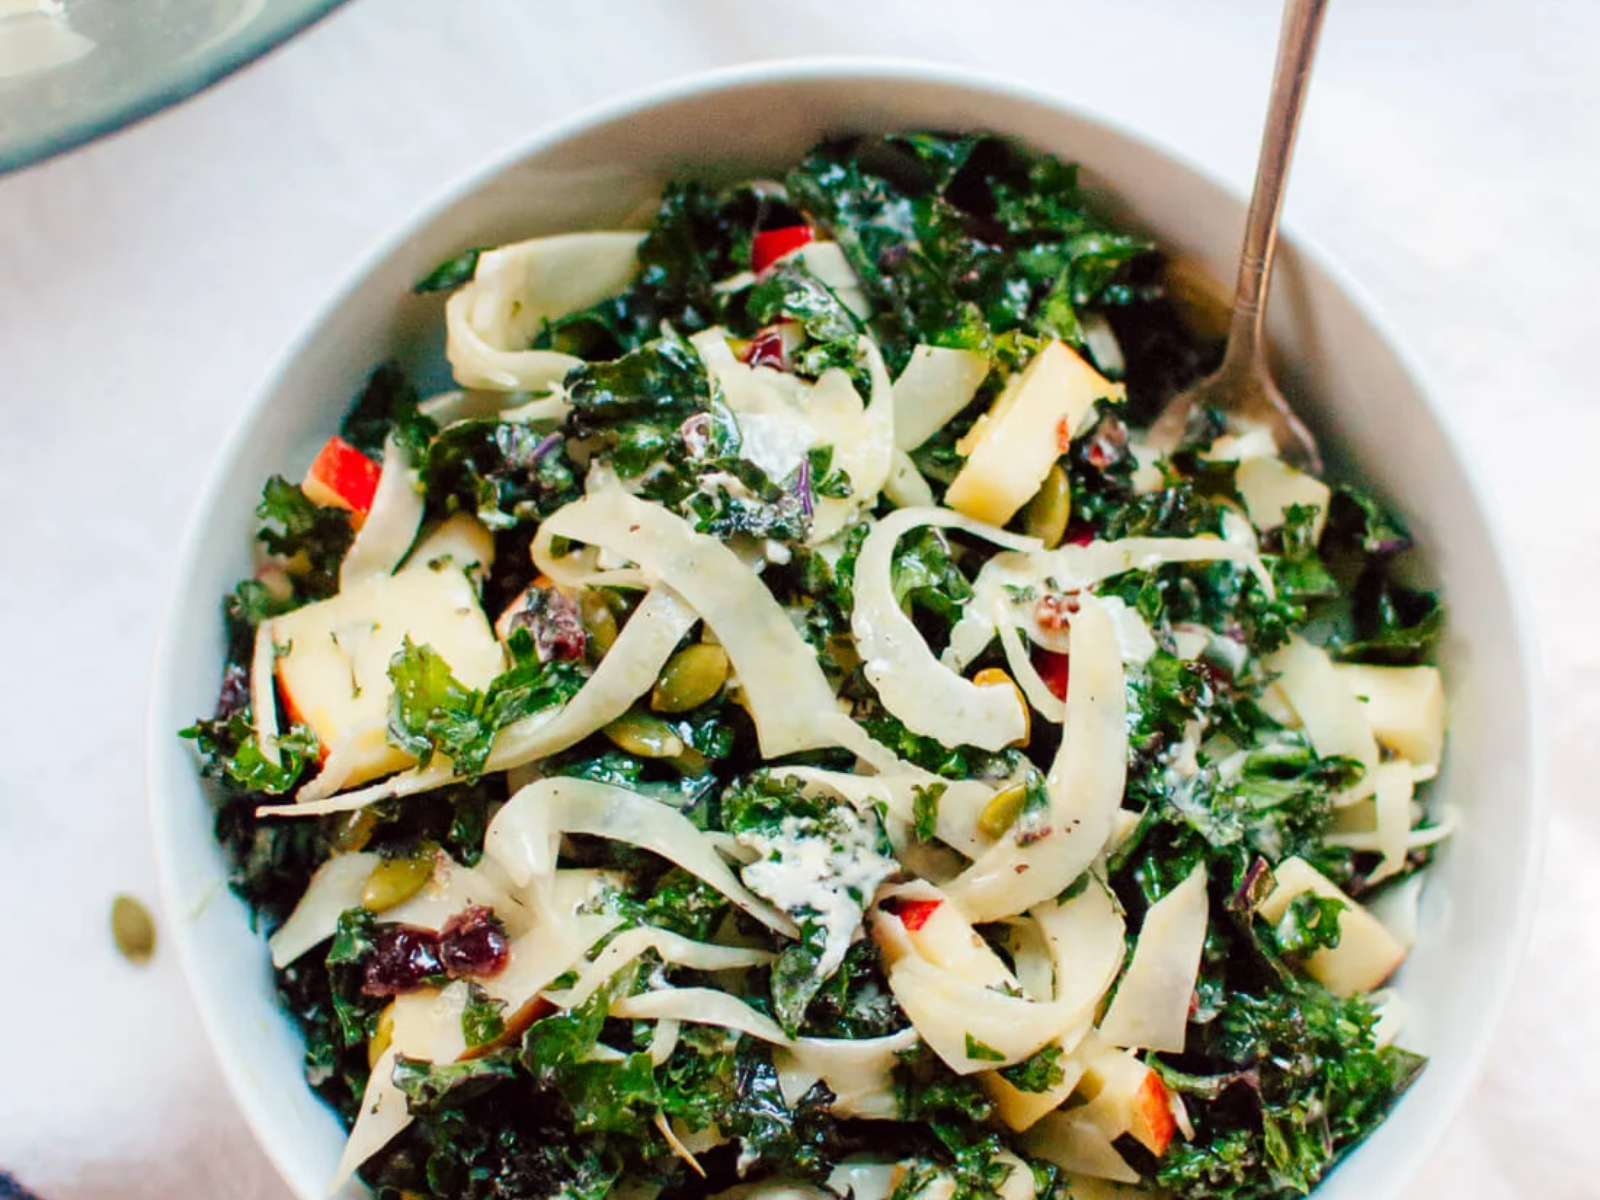 Autumn Kale Salad with Fennel, Honeycrisp, and Goat Cheese